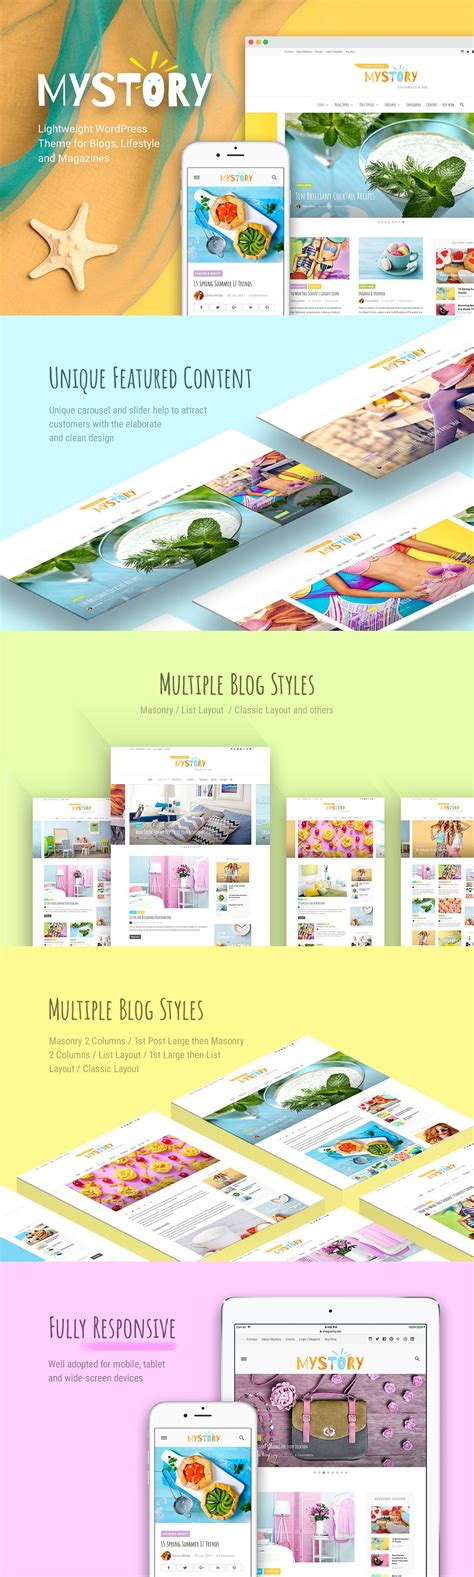 Colorful Wordpress Theme For Your Blog Mystory Blog Magazine Theme By Thegravity Themes On